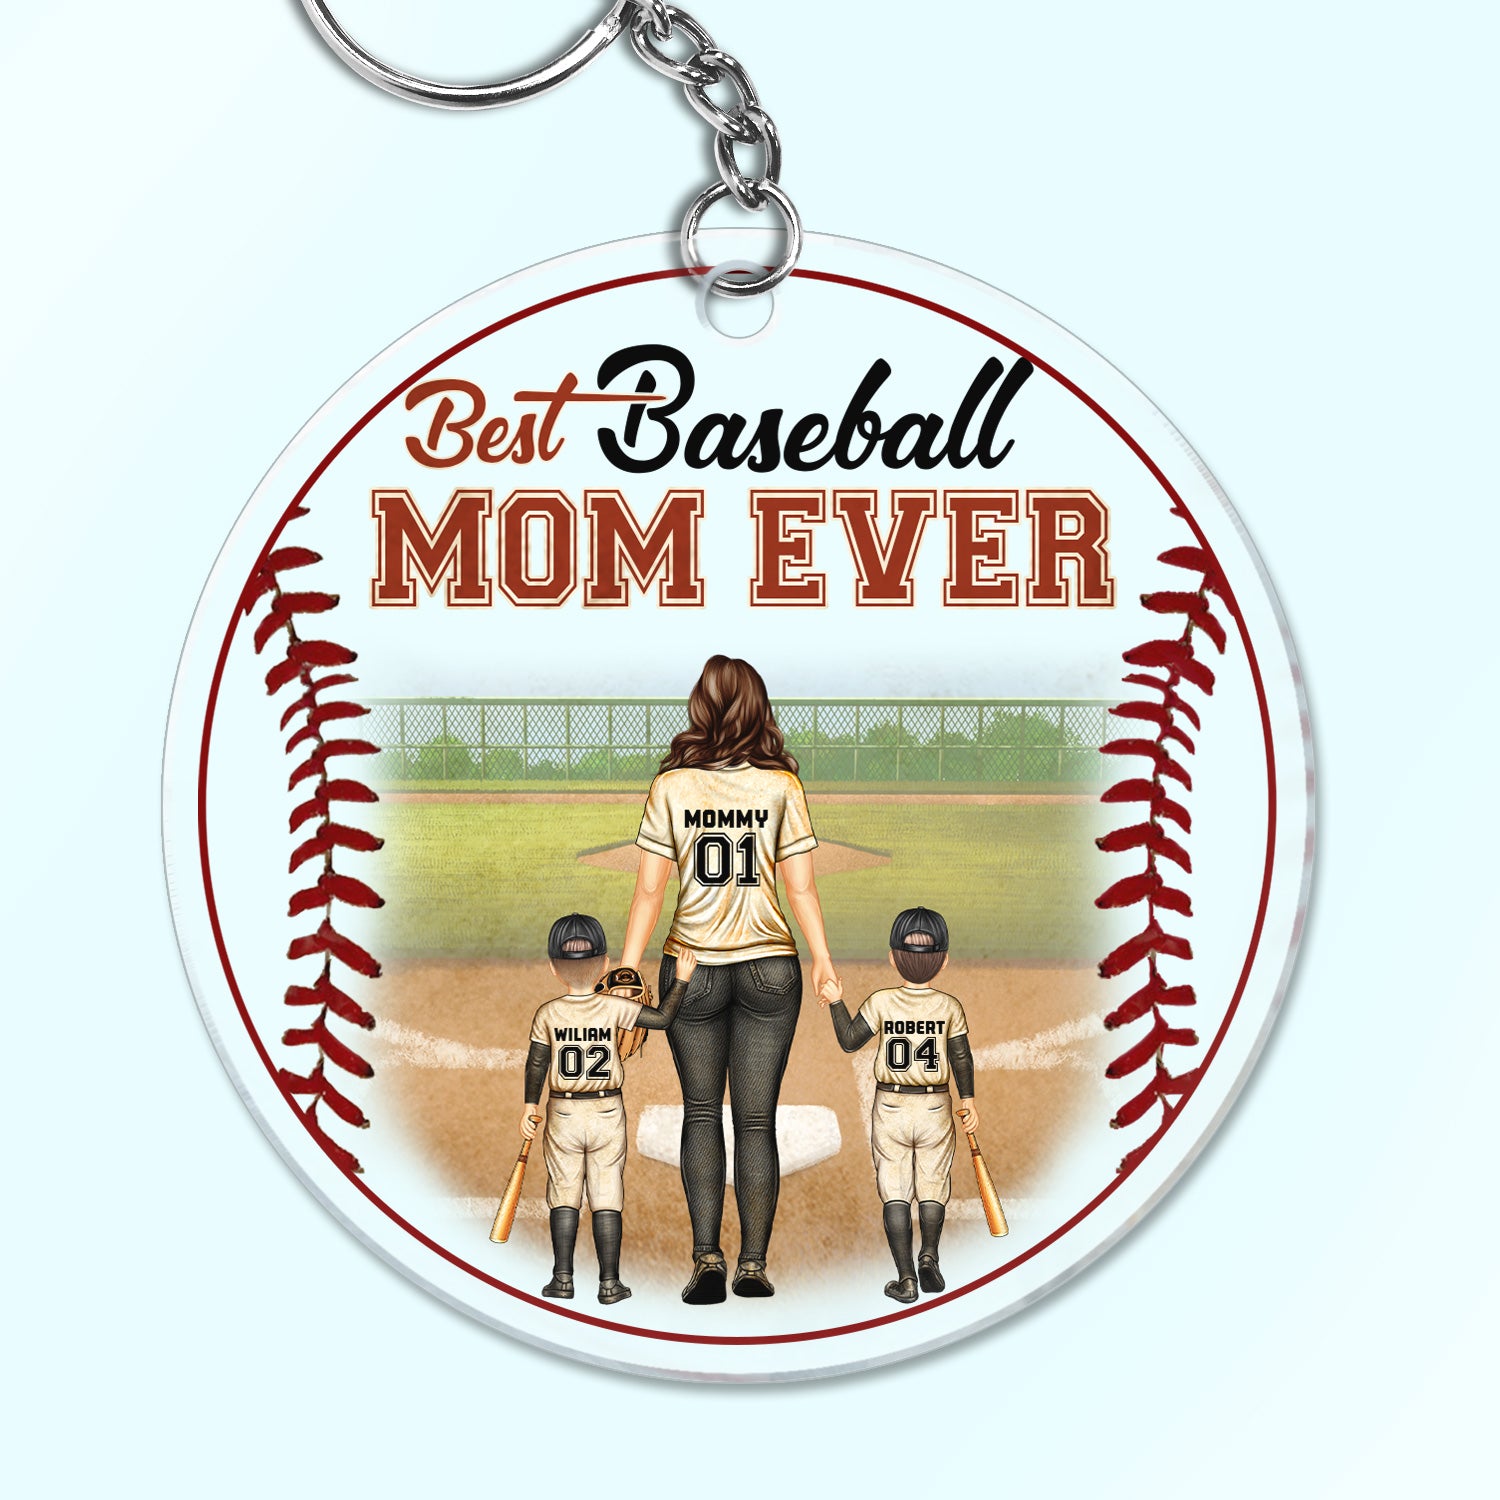 Baseball Lover Gifts Ideas Funny Quotes Boy Mom Surrounded By Balls Customs  Graphic Design For Mom Womens Gift Ideas For Mom And Women W - Sweet Family  Gift